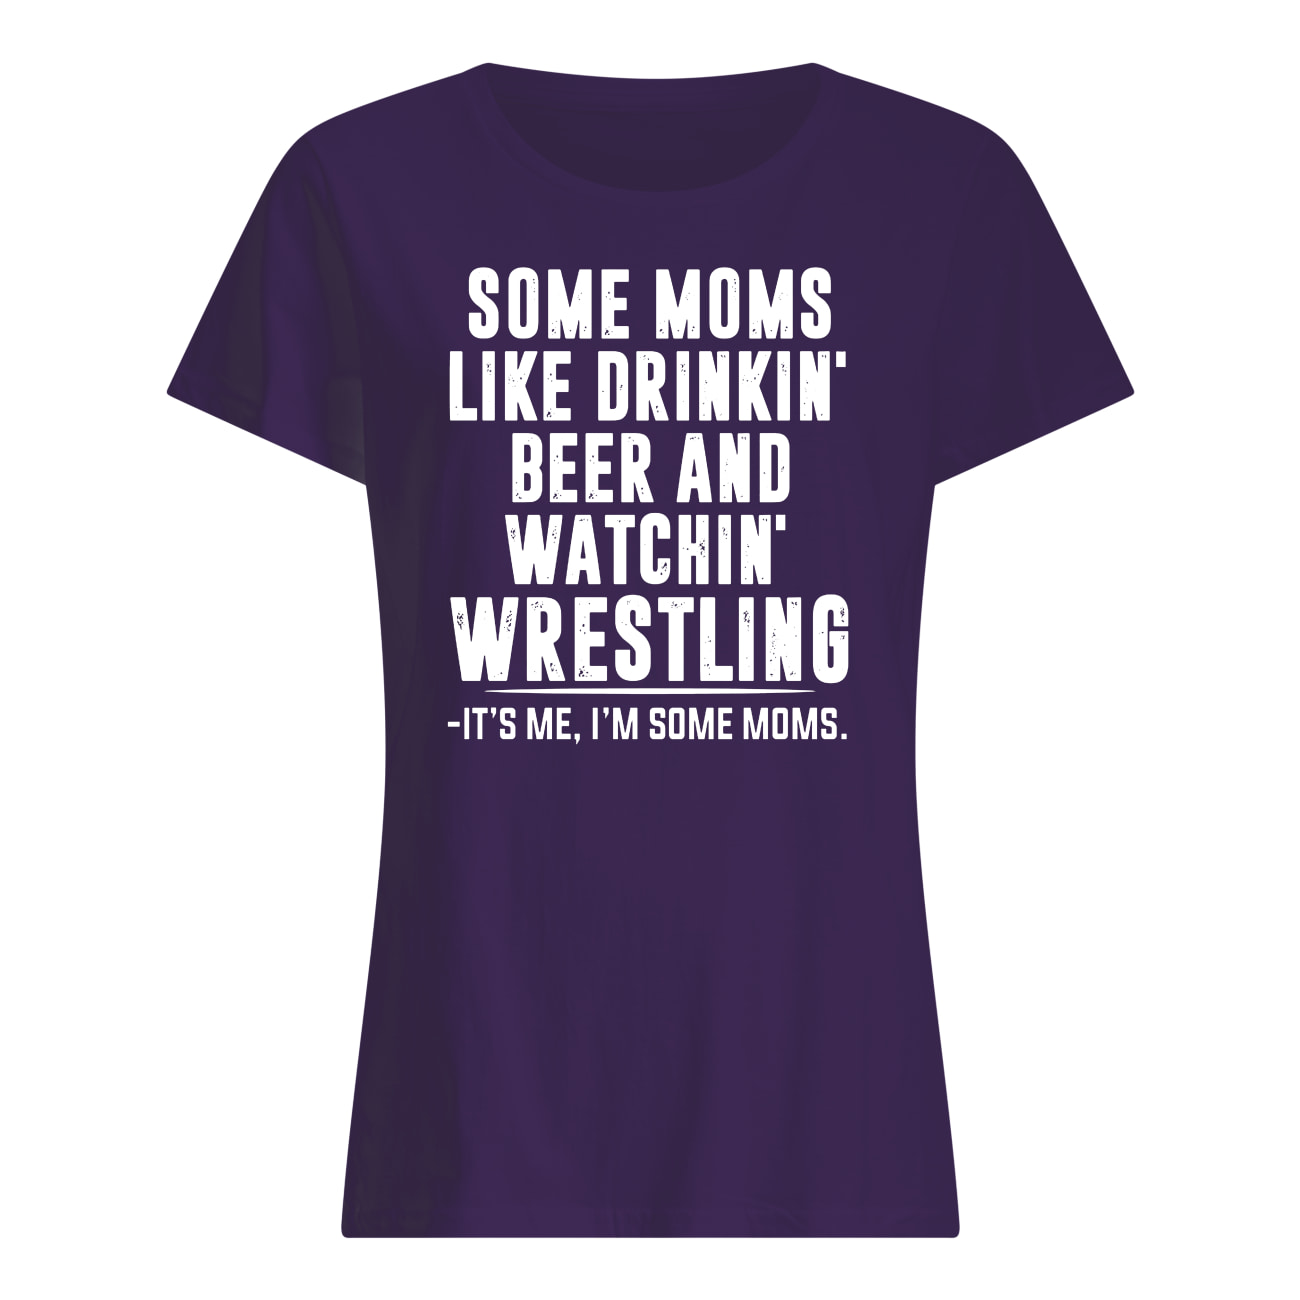 Some moms like drinkin' beer and watchin' wrestling womens shirt